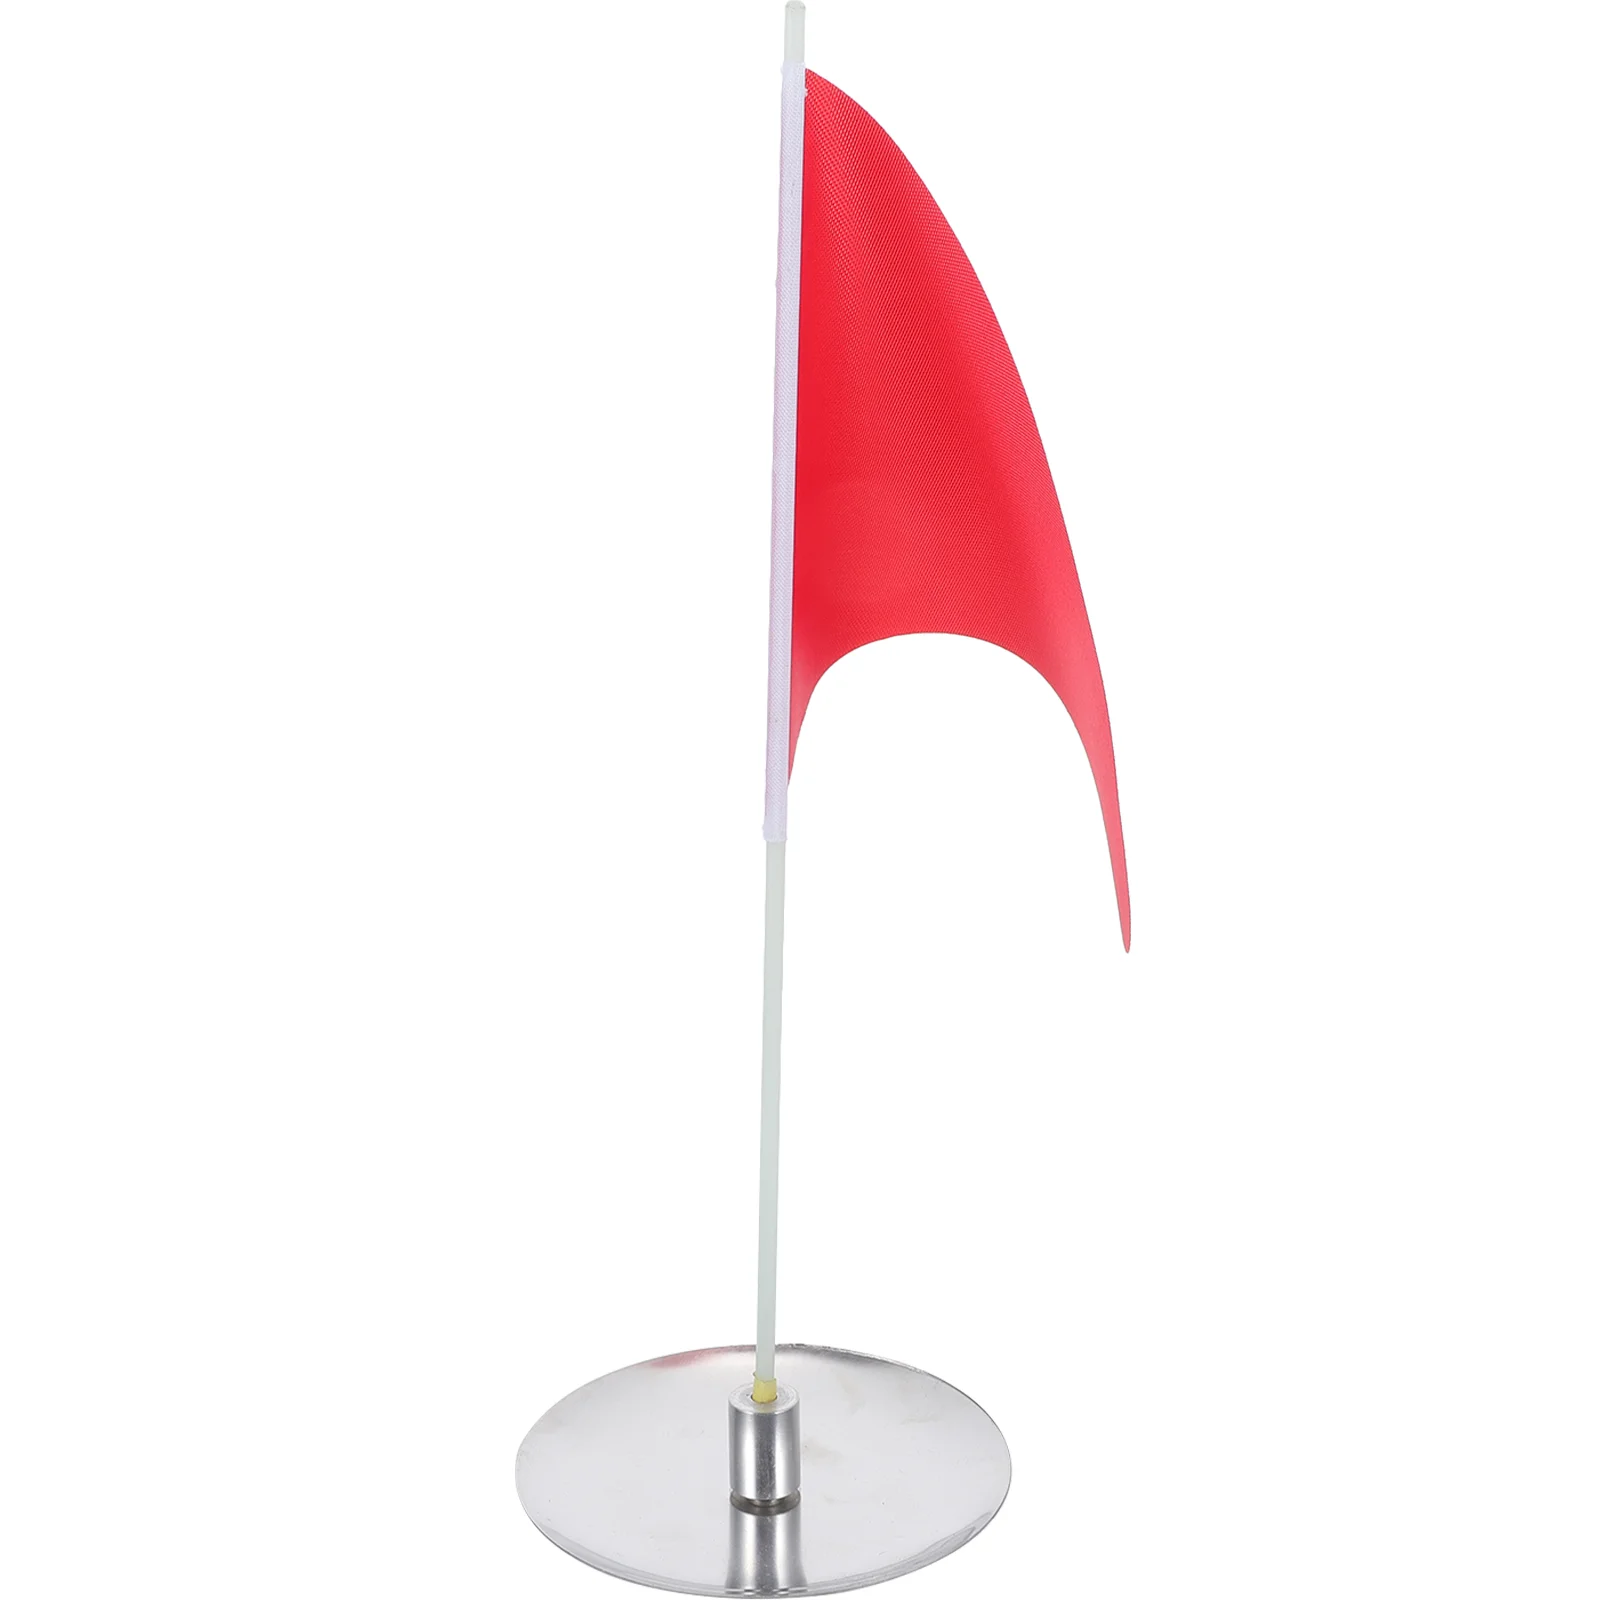 

Golf Flagpole Target Golfing Flags Accessories Flagstick Small Golfs Targeting Mini